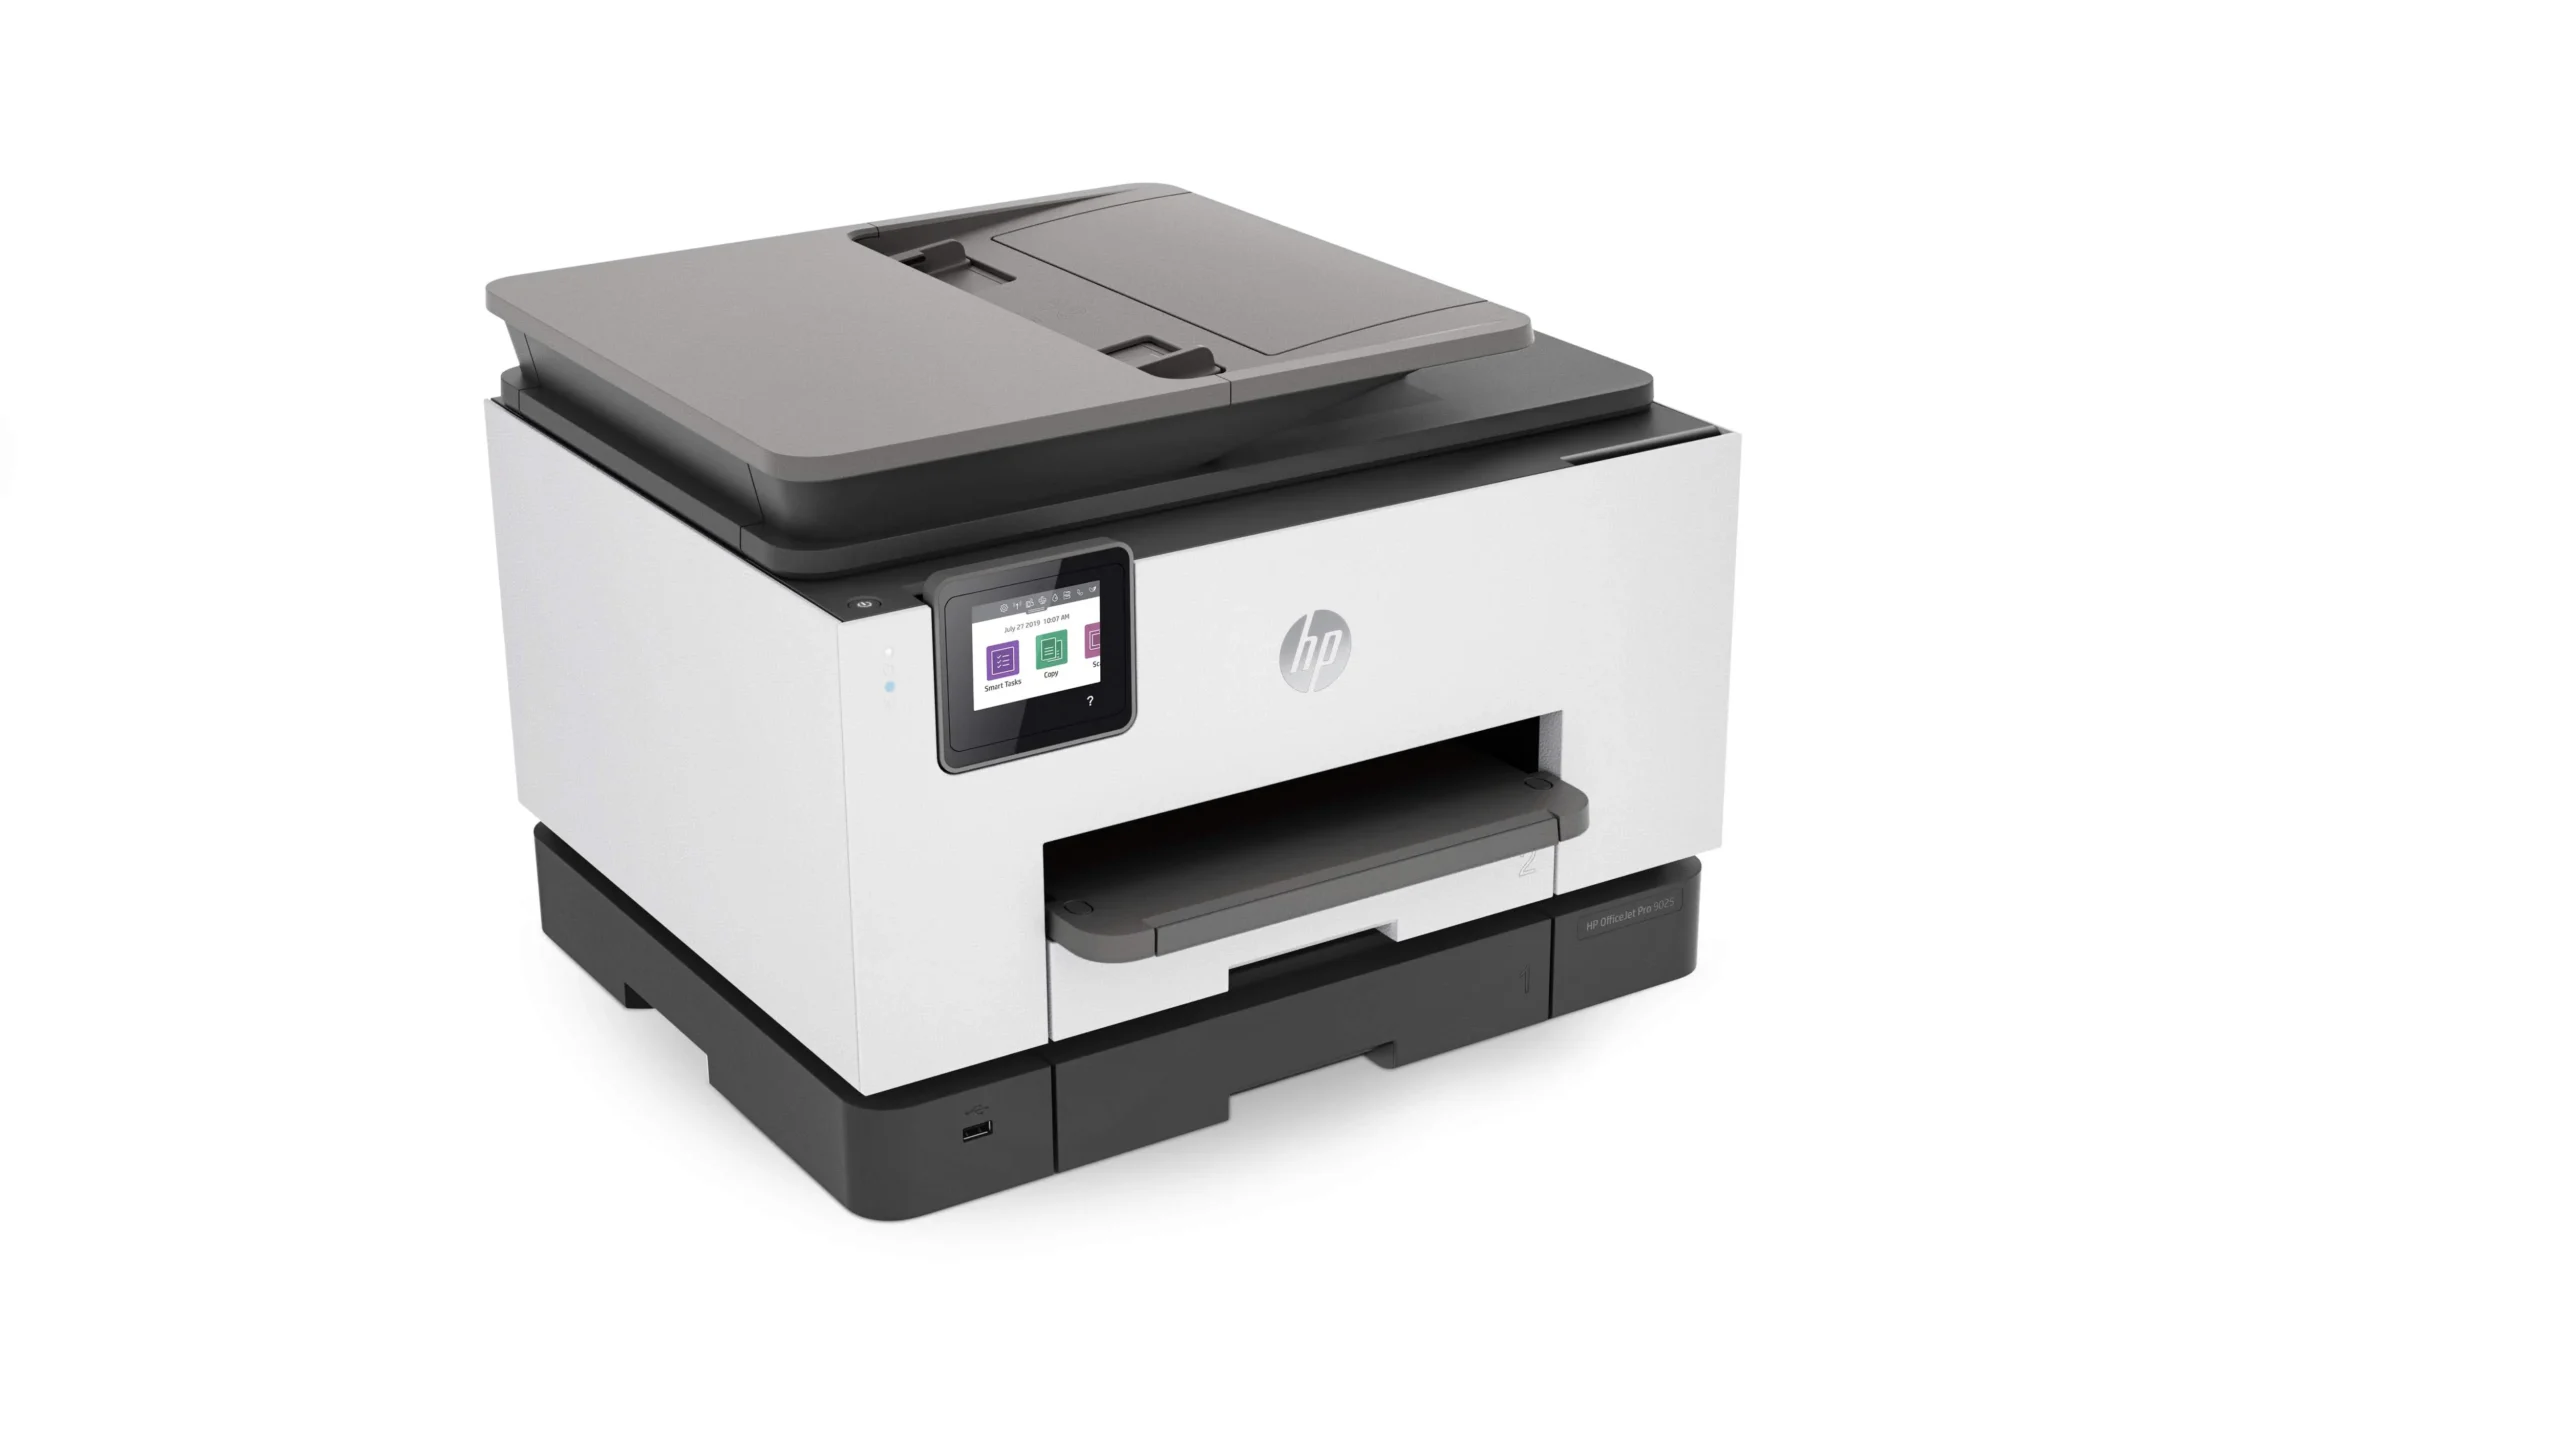 hewlett packard 9025 printer reviews - How much does HP 9025 cost per page